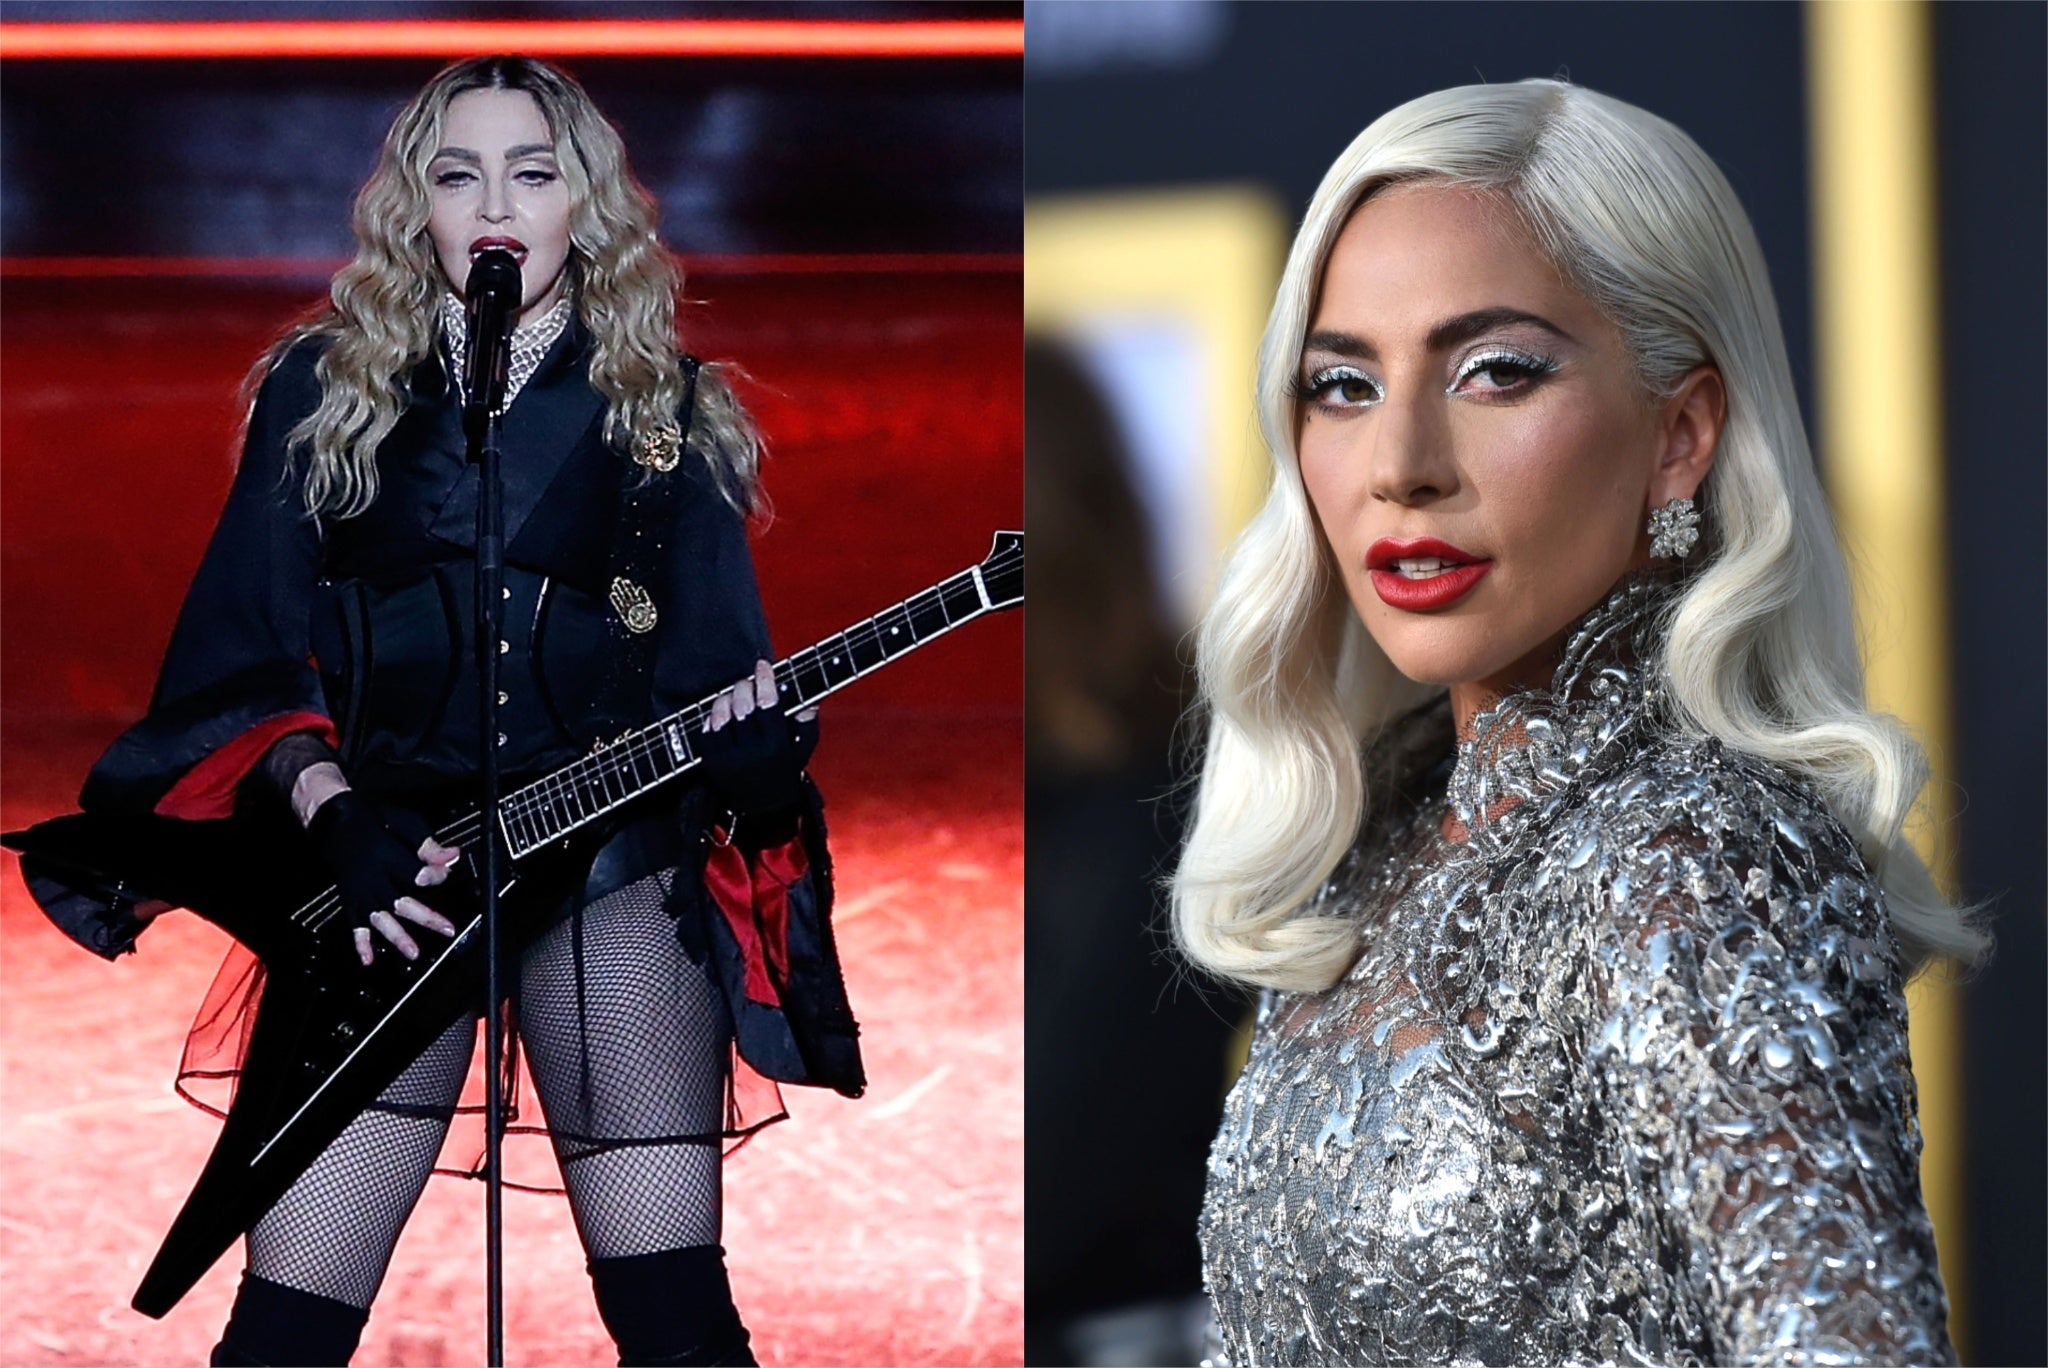 Madonna previously criticised Lady Gaga for her ‘reductive’ song ‘Born This Way'